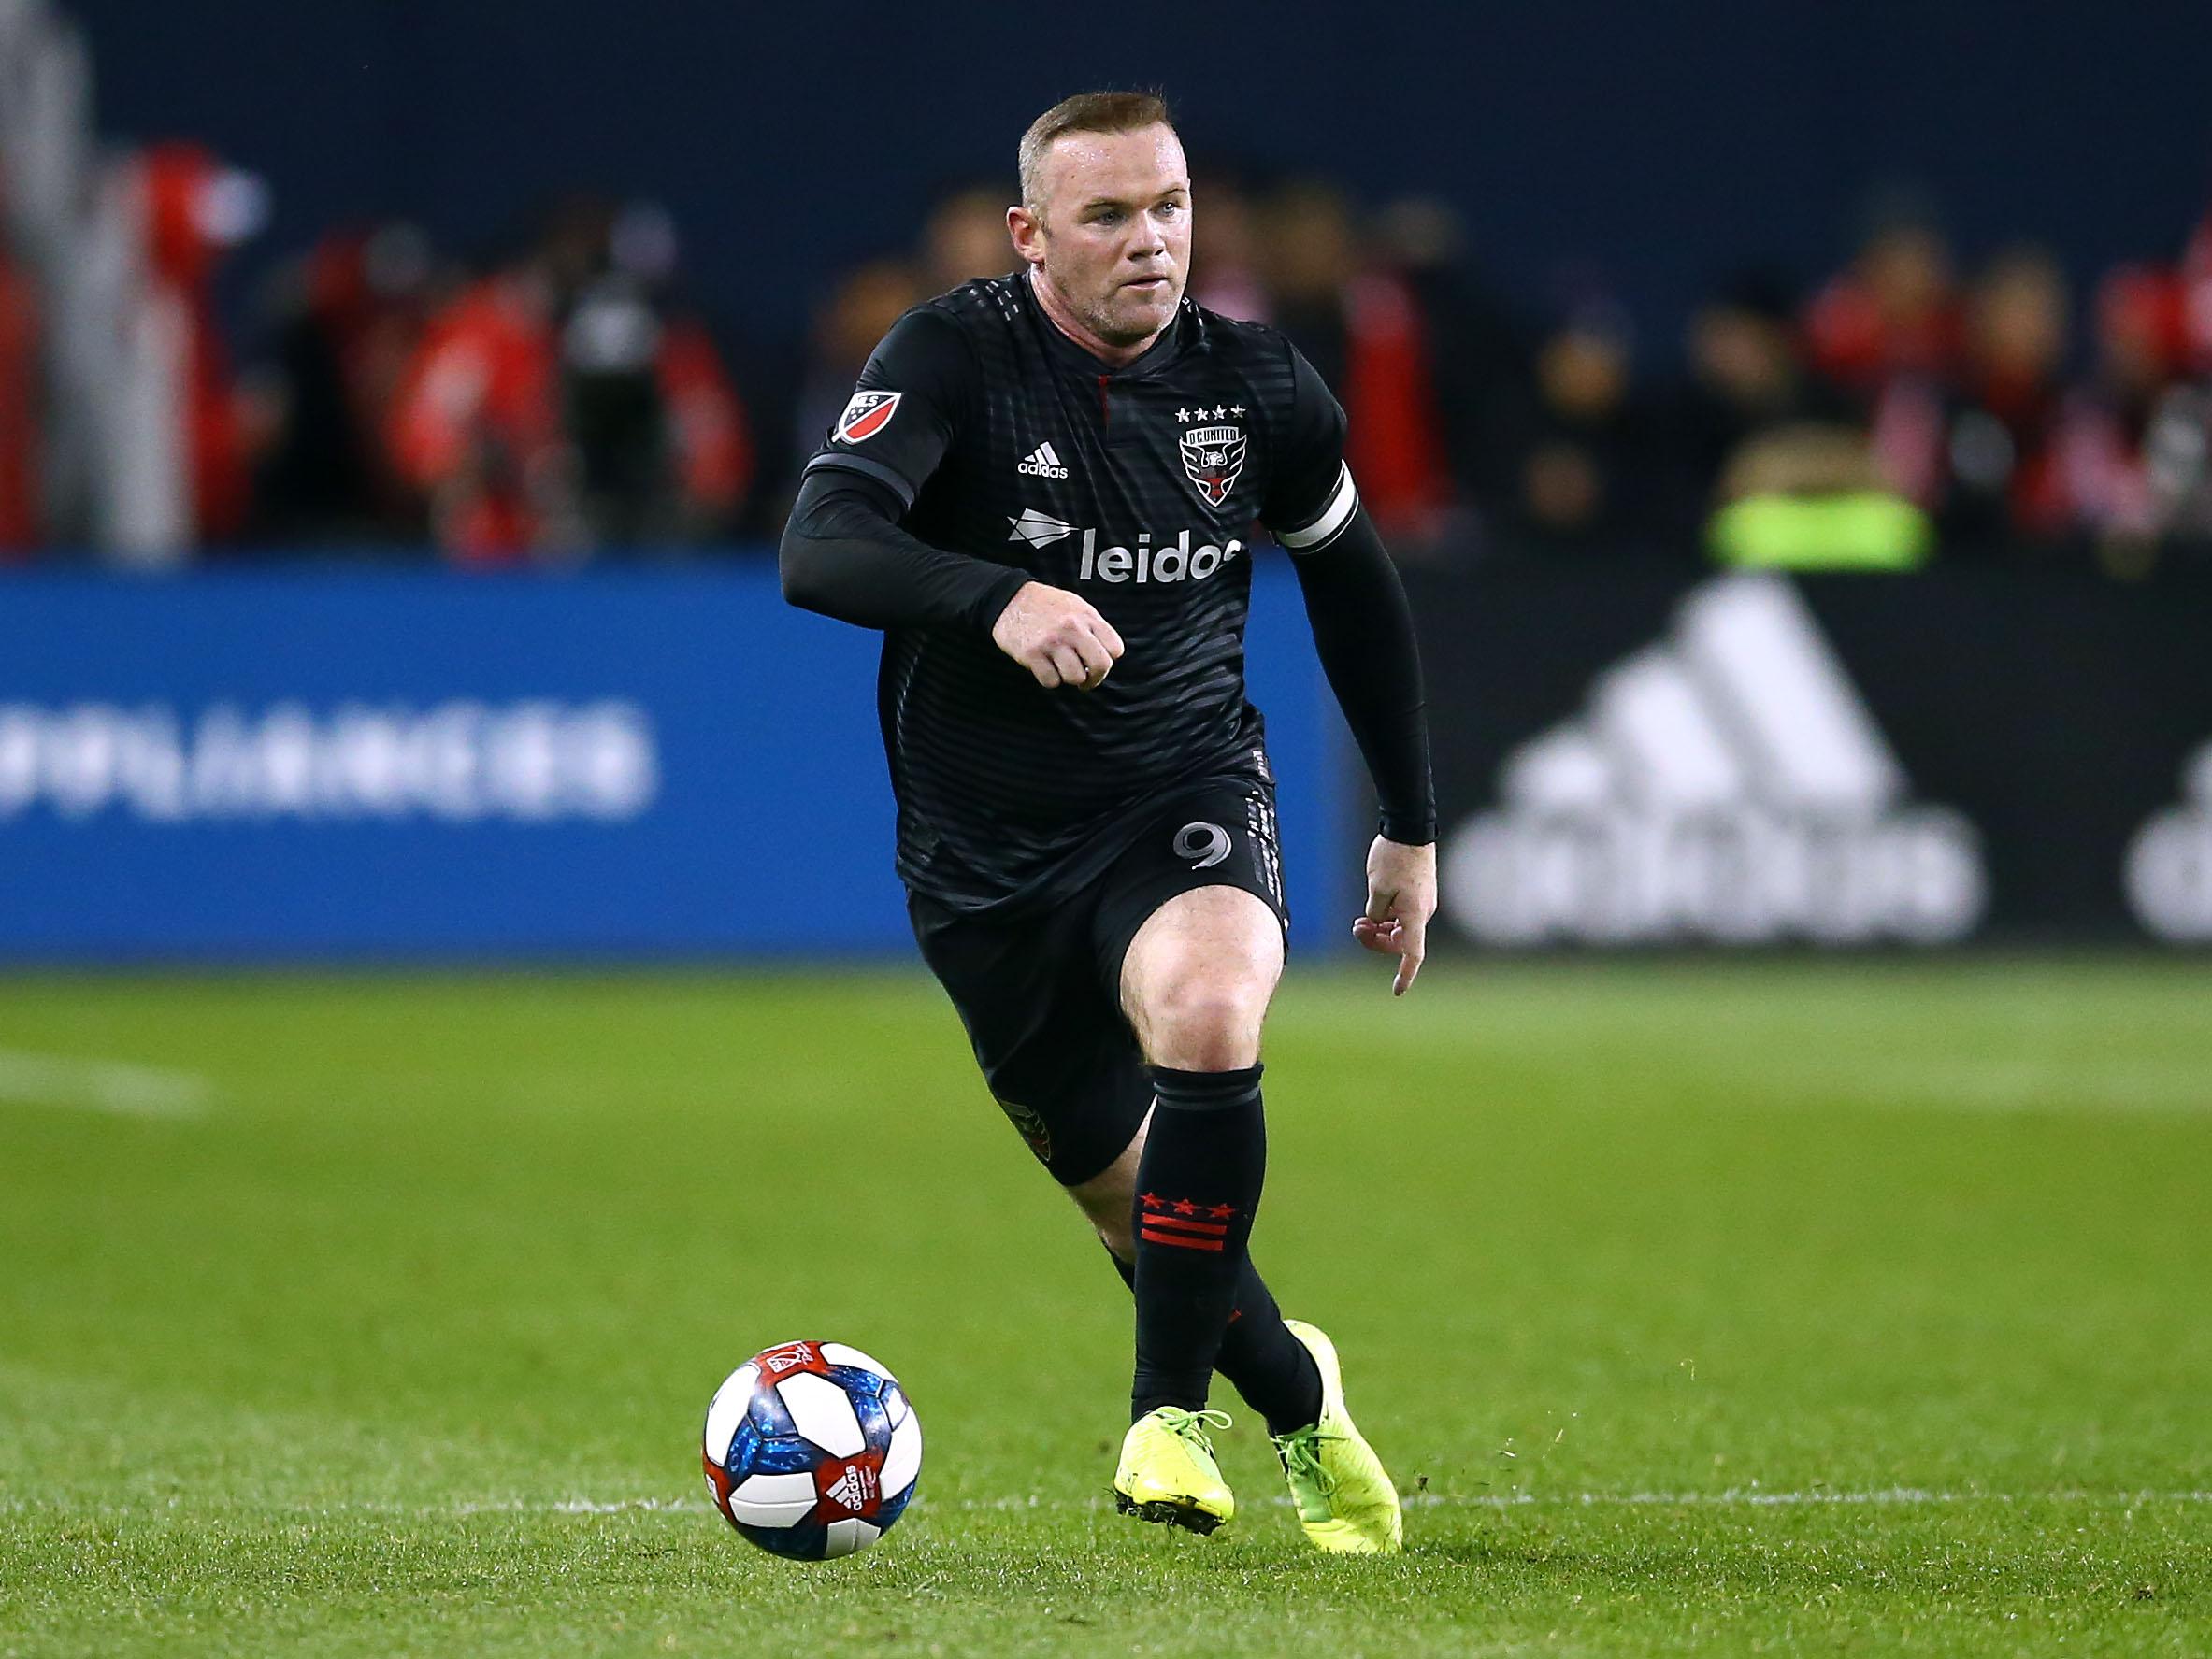 Wayne Rooney’s MLS adventure came to an end as DC United lost to Toronto FC